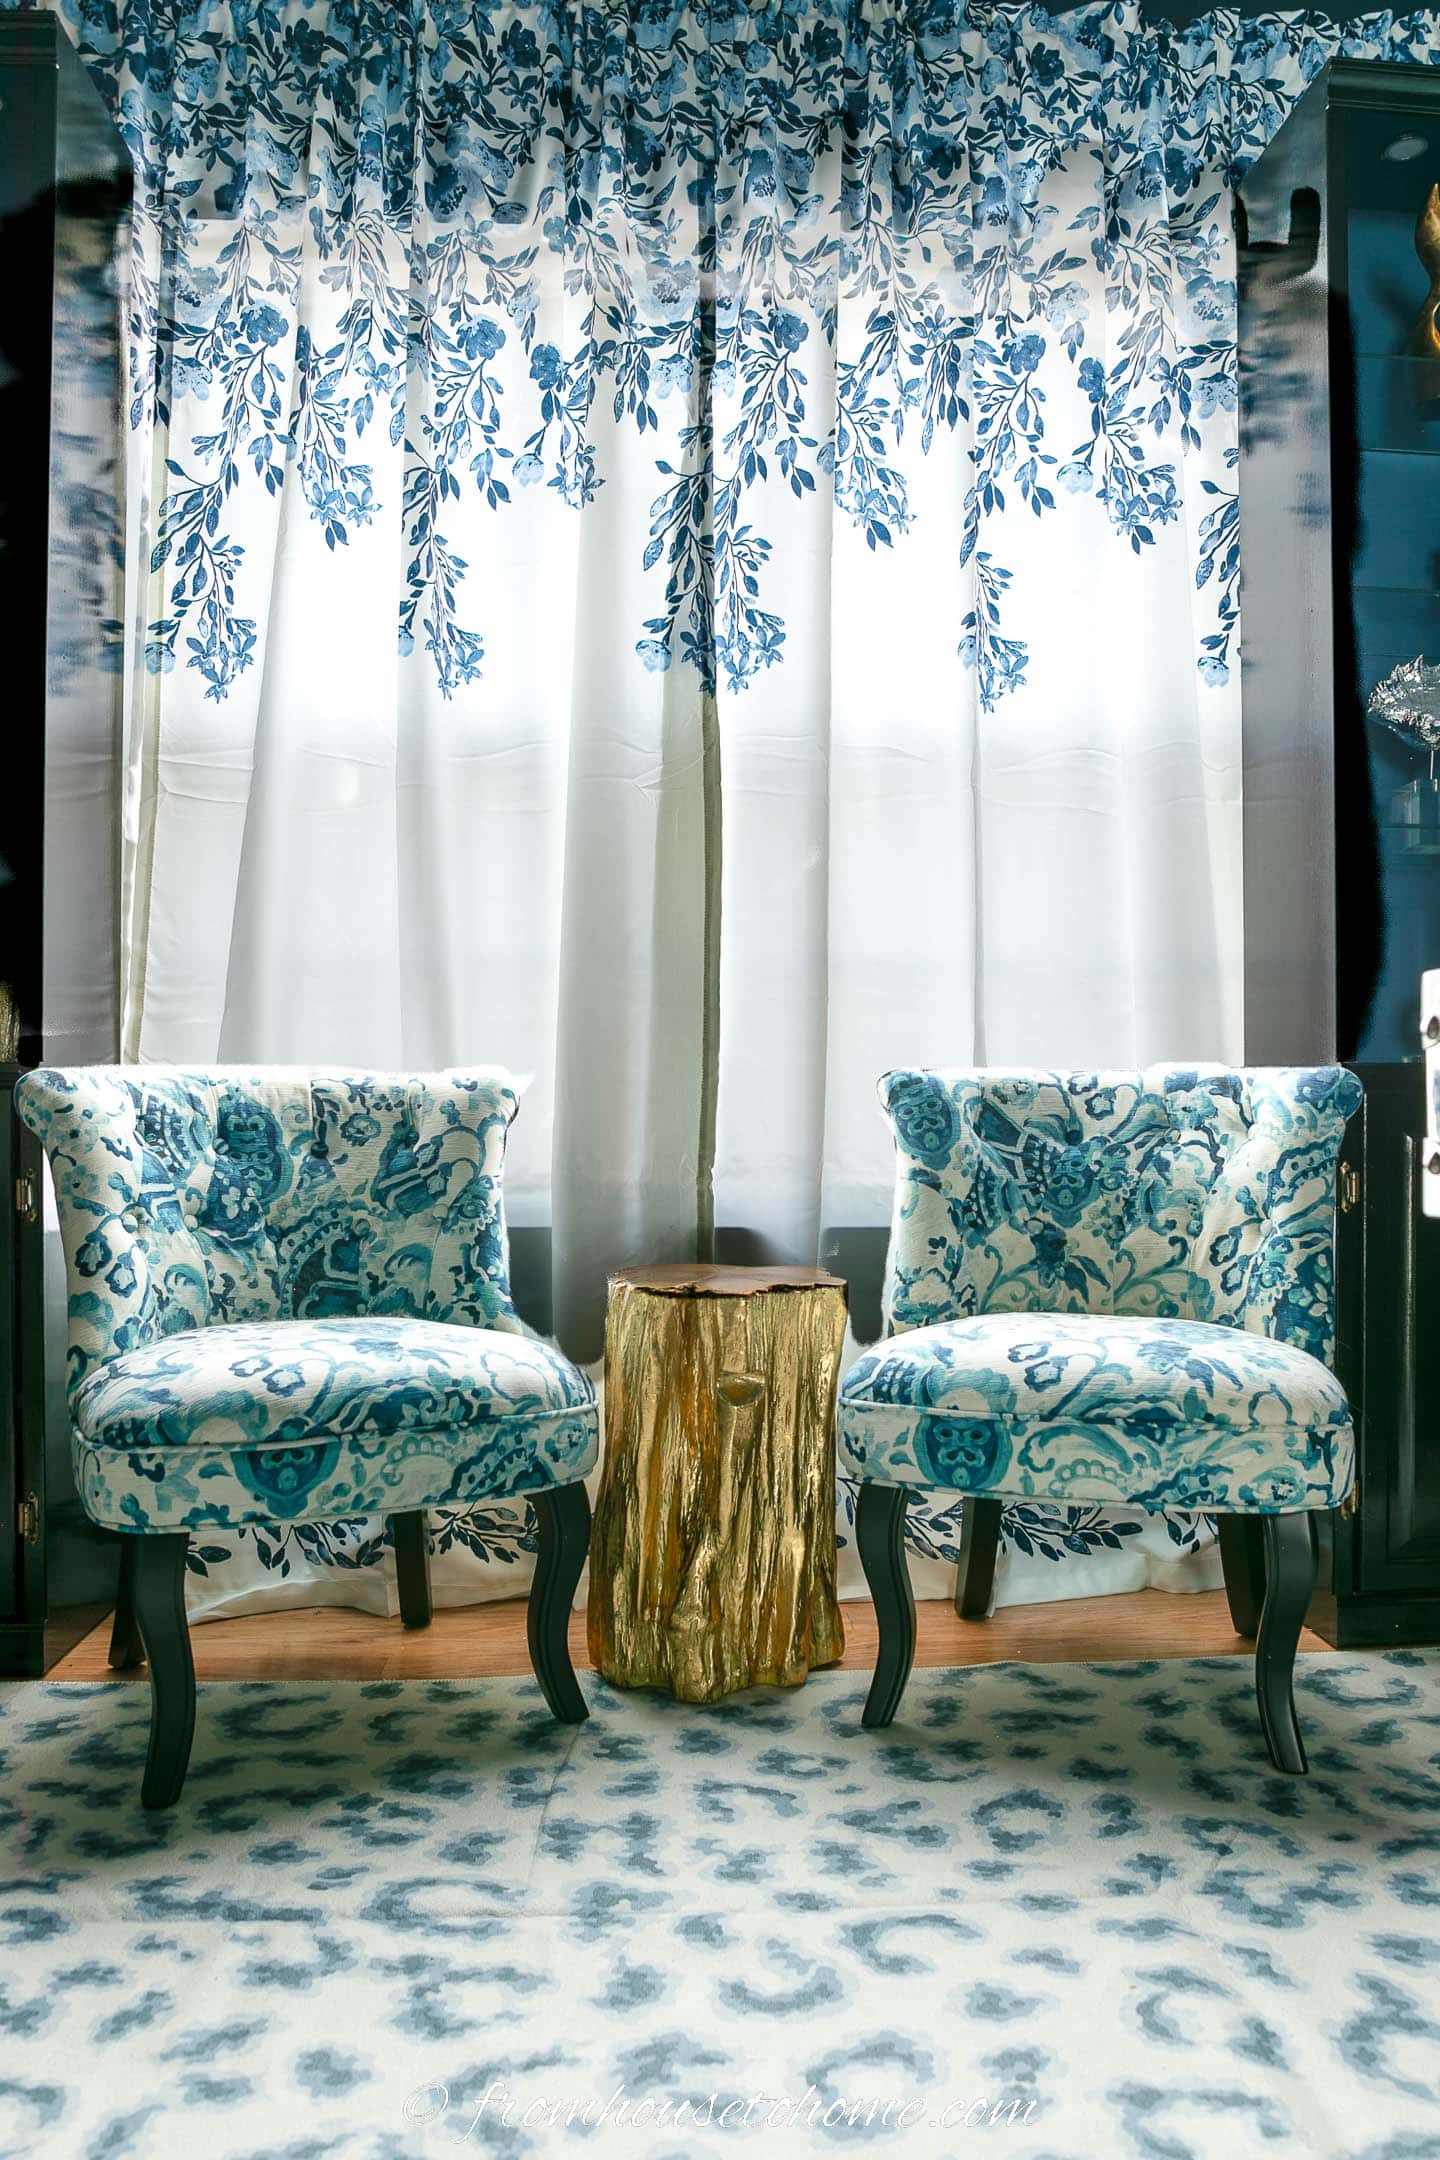 Two small chairs and a table in front of blue and white curtains